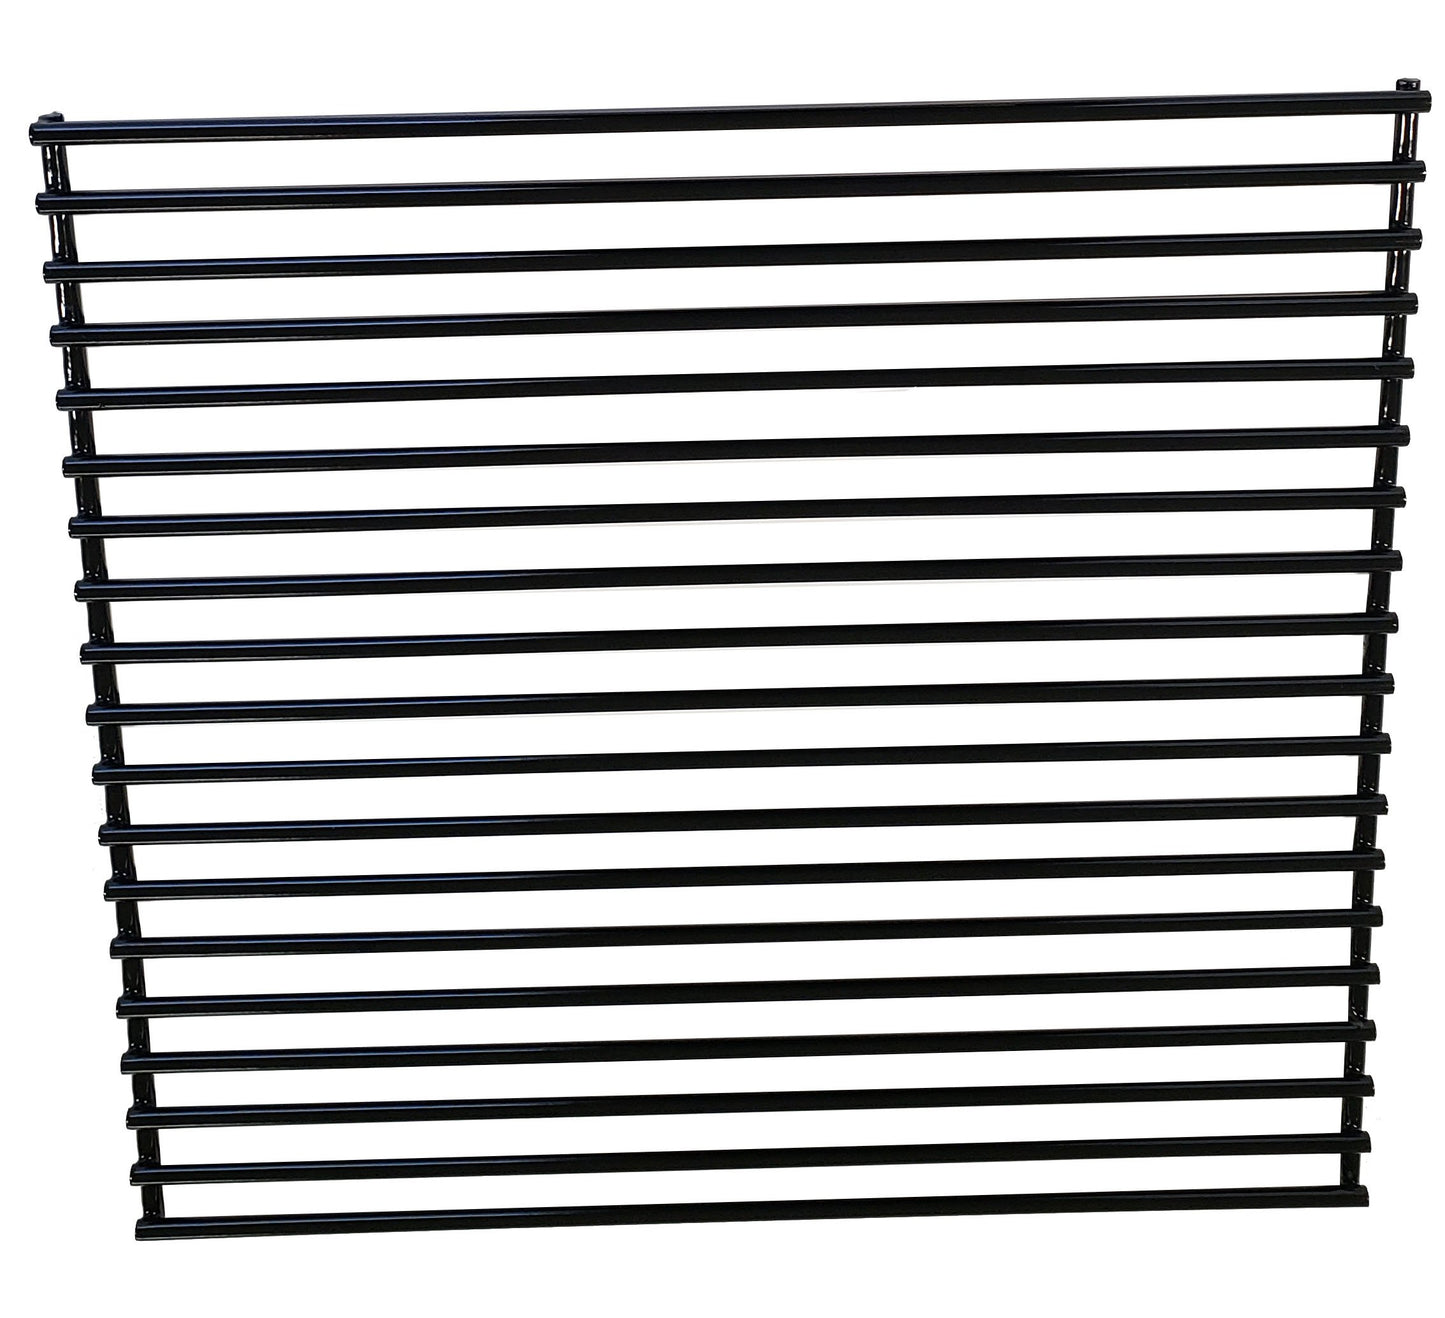 Broil King 10225T422 porcelain coated cooking grid.  Old rusted and grimy grills can make grilling more of a hassle than a pleasure. Swap your old parts out for some new grids and rediscover that new BBQ feeling! Available with Barbecues Galore: Burlington, Oakville, Etobicoke & Calgary.